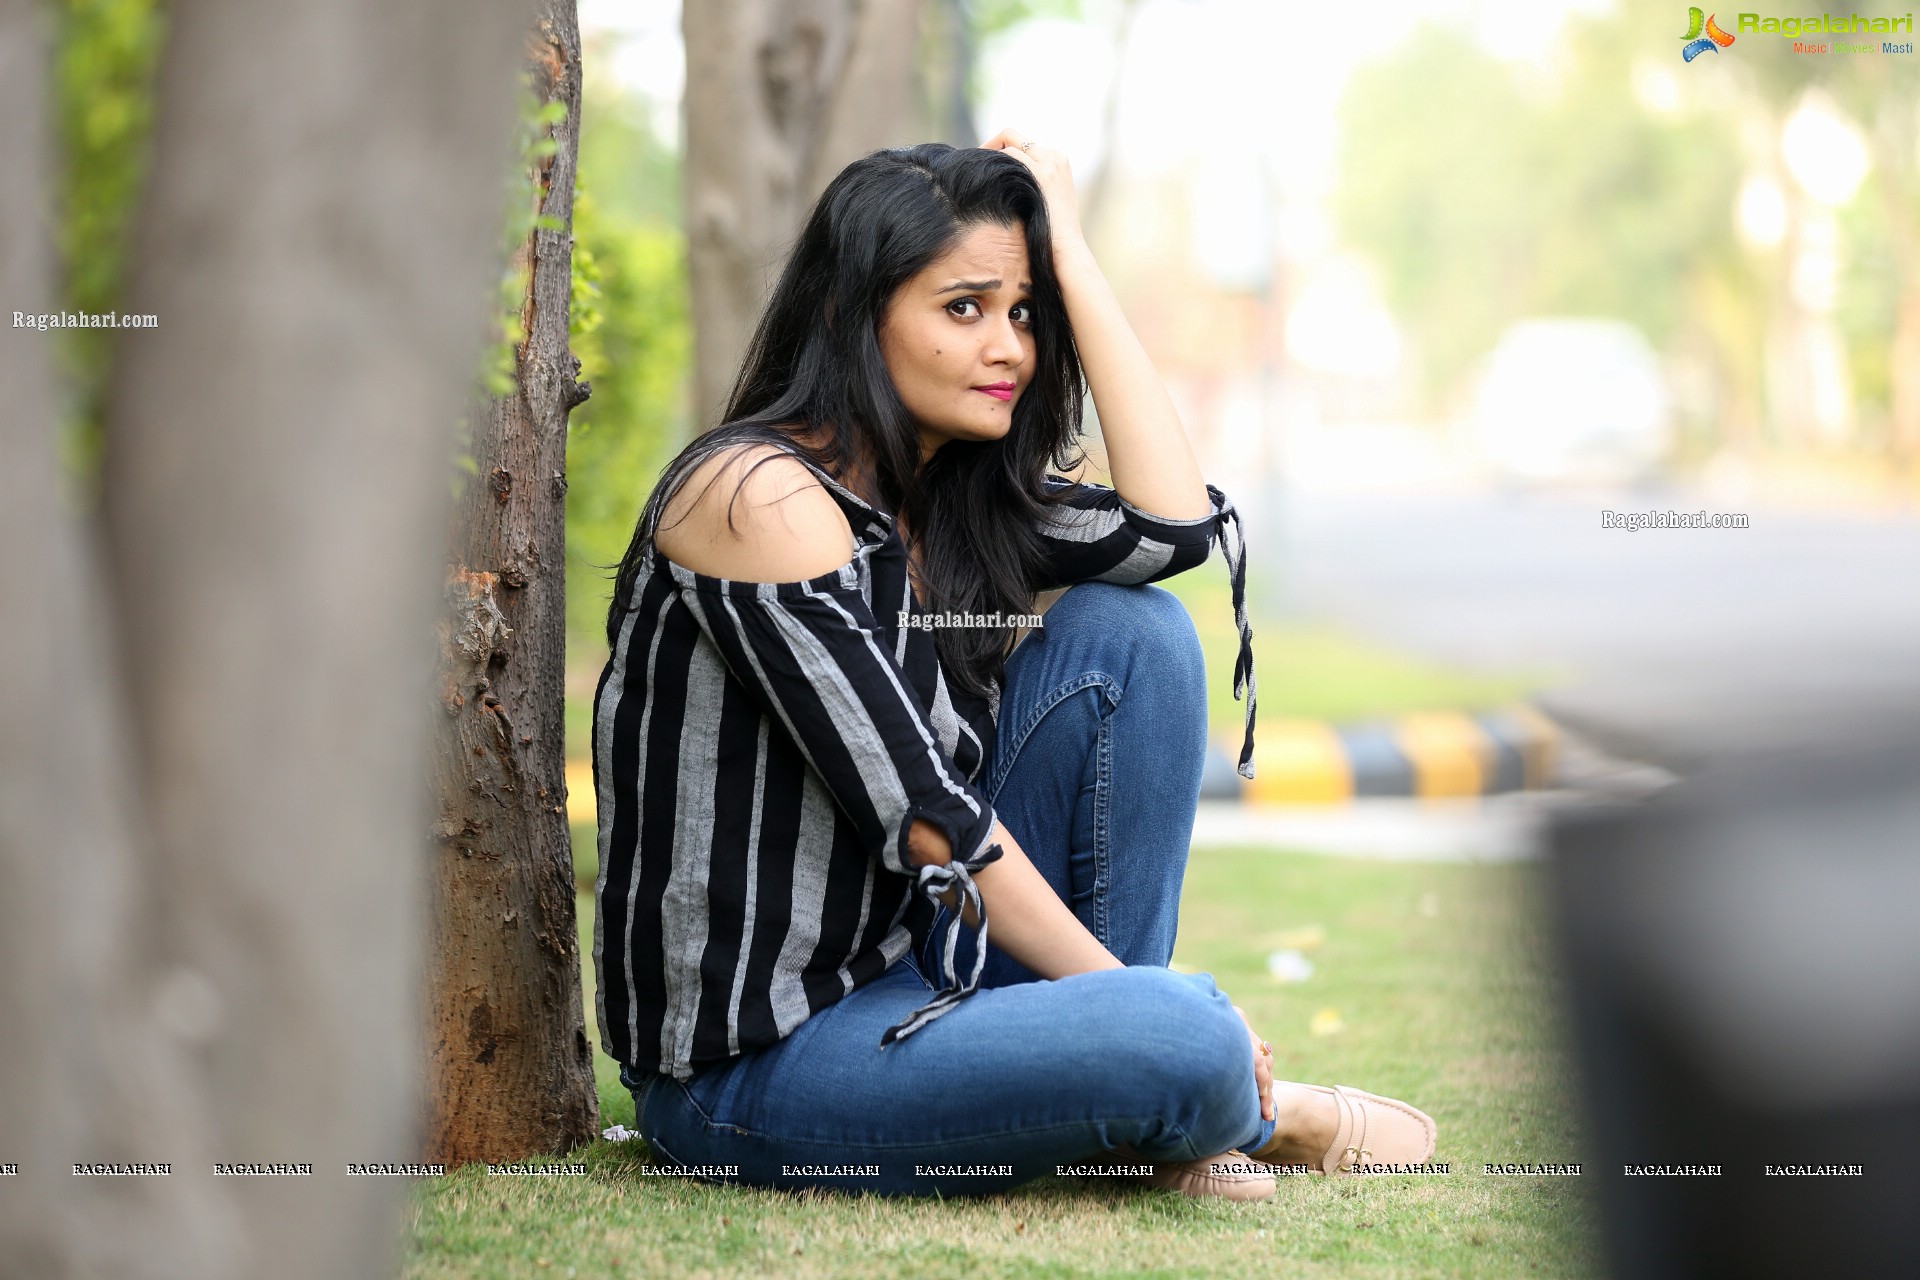 Usha Kurapati in Grey And Black Stripes Cold Shoulders Top, HD Photo Gallery